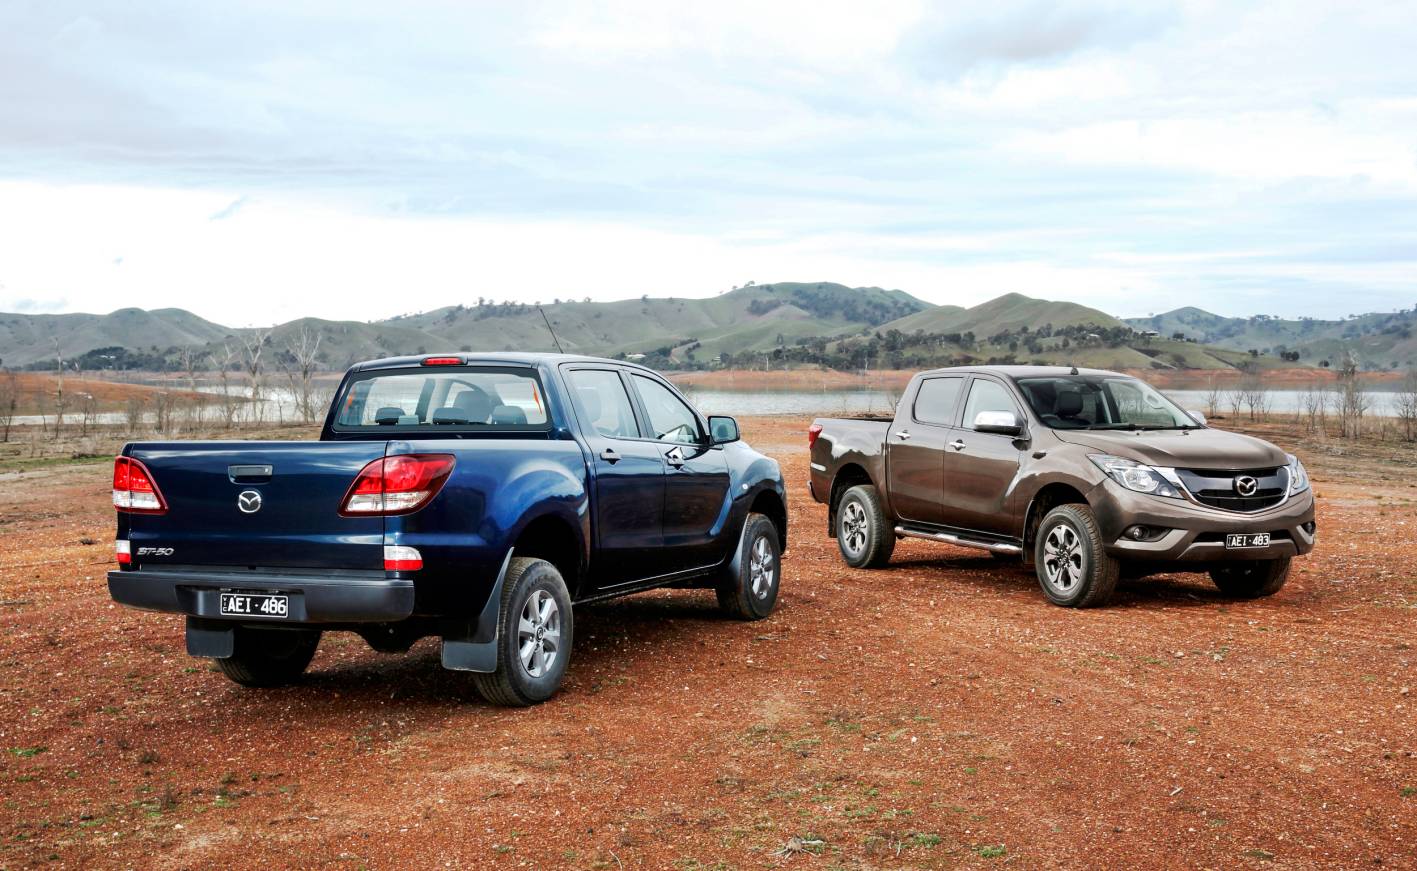 News - New 2015 Mazda BT-50 Launched